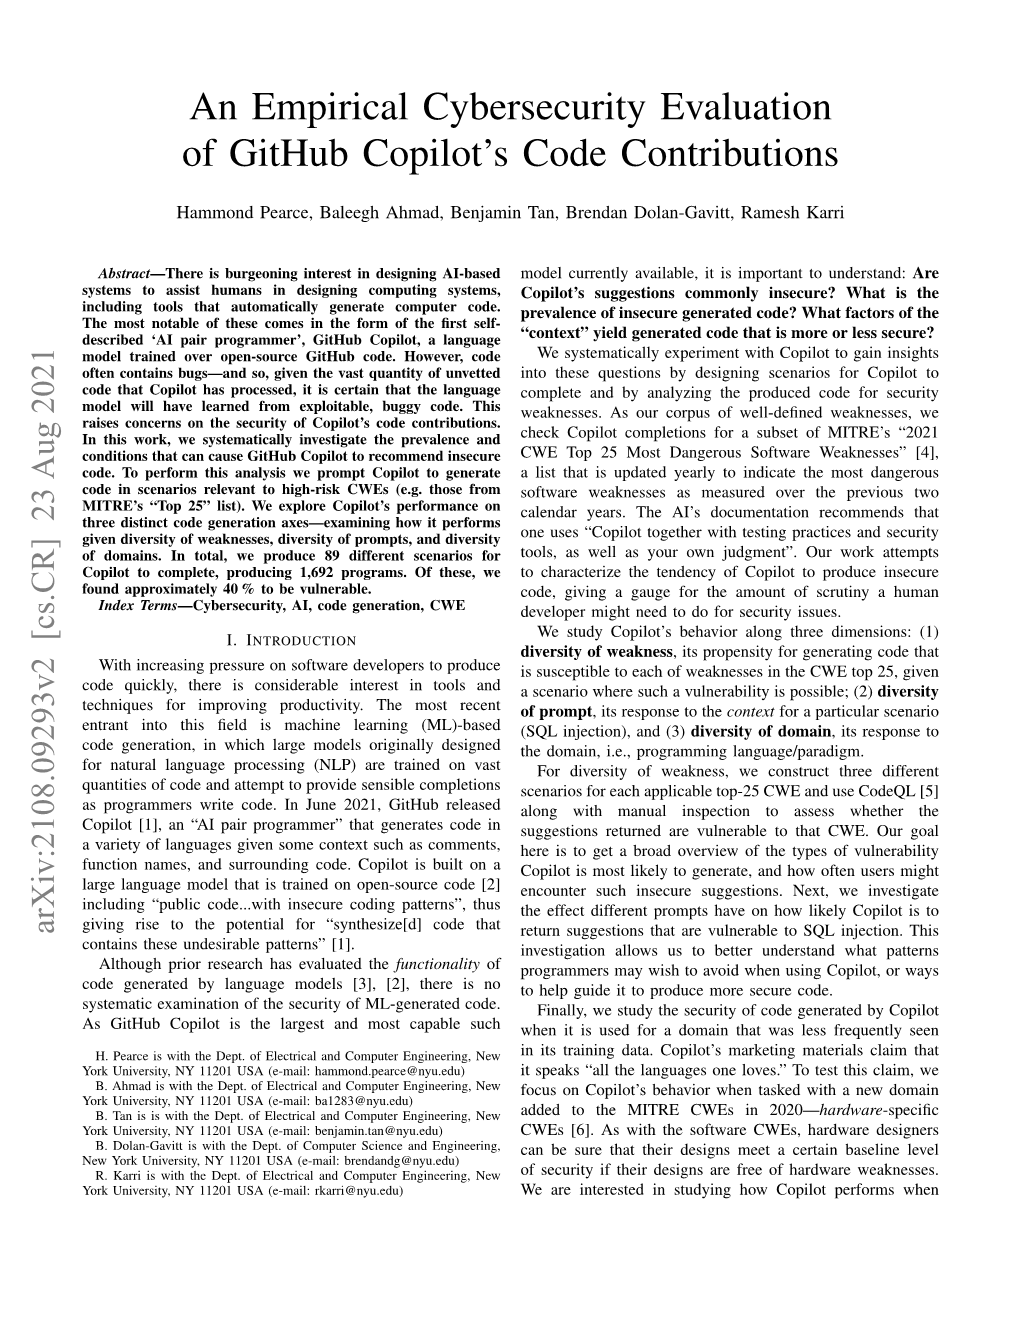 An Empirical Cybersecurity Evaluation of Github Copilot's Code Contributions